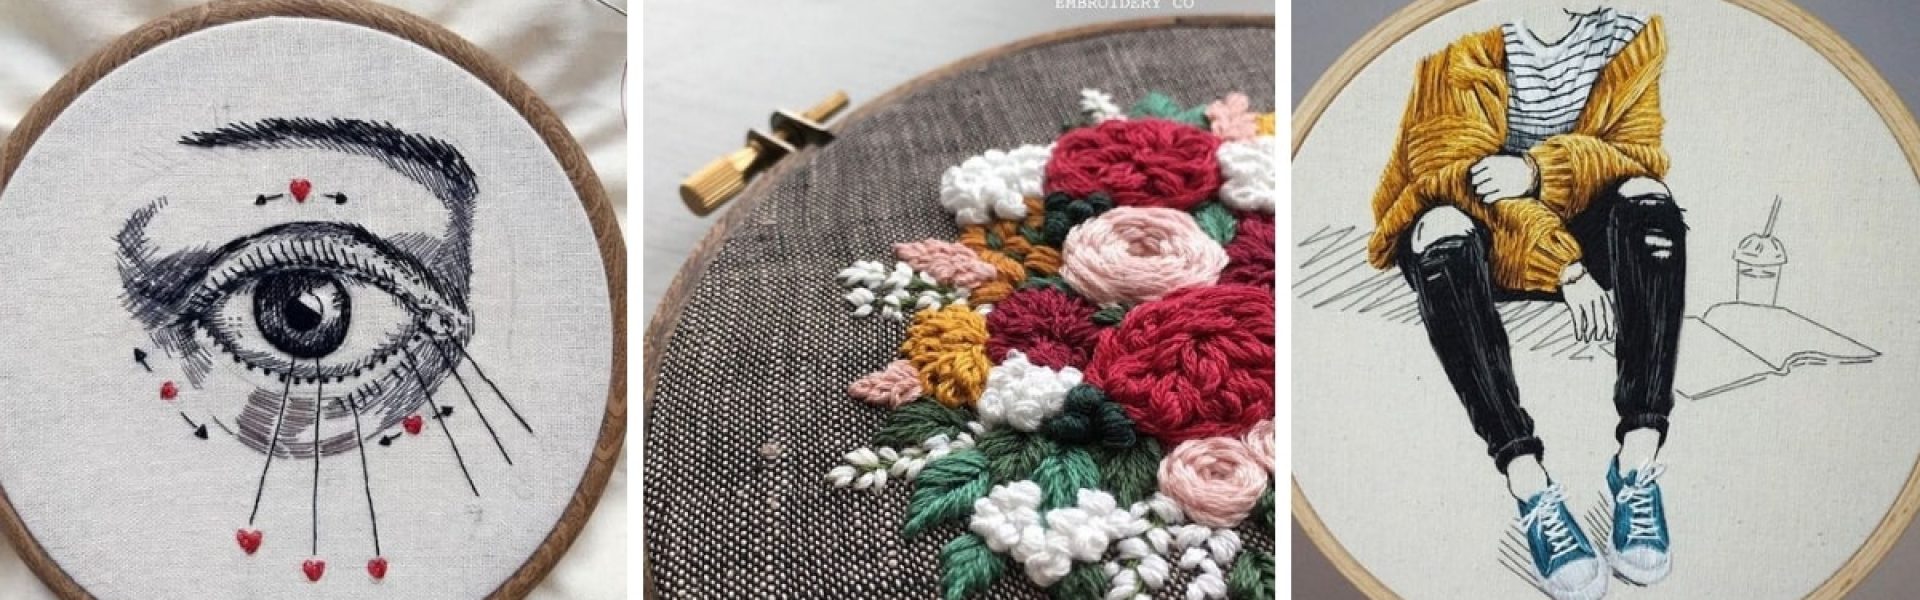 Embroidery Artist